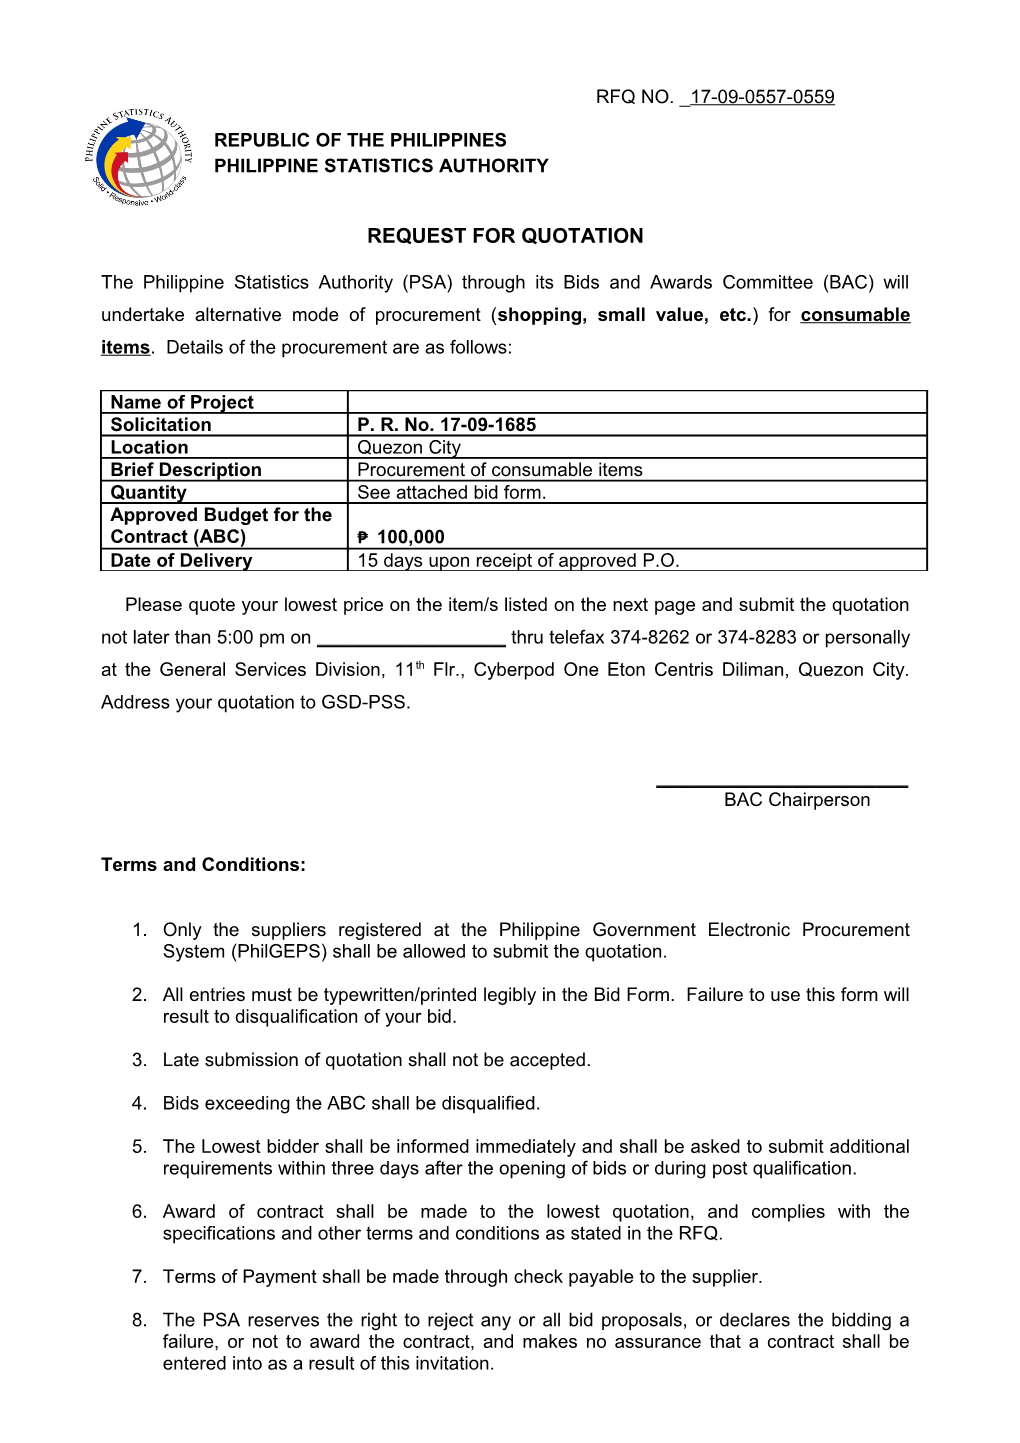 Request for Quotation s25